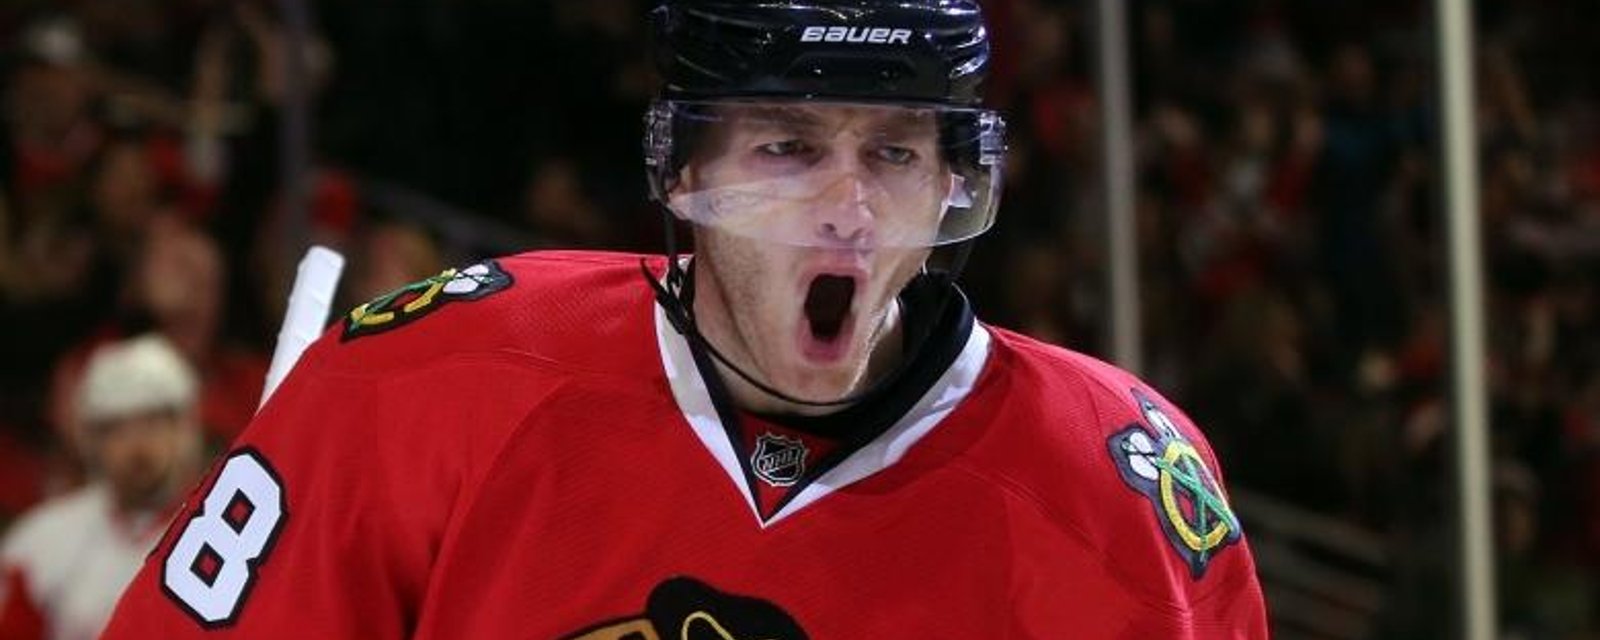 The NHL has made their final decision on the Patrick Kane rape case.